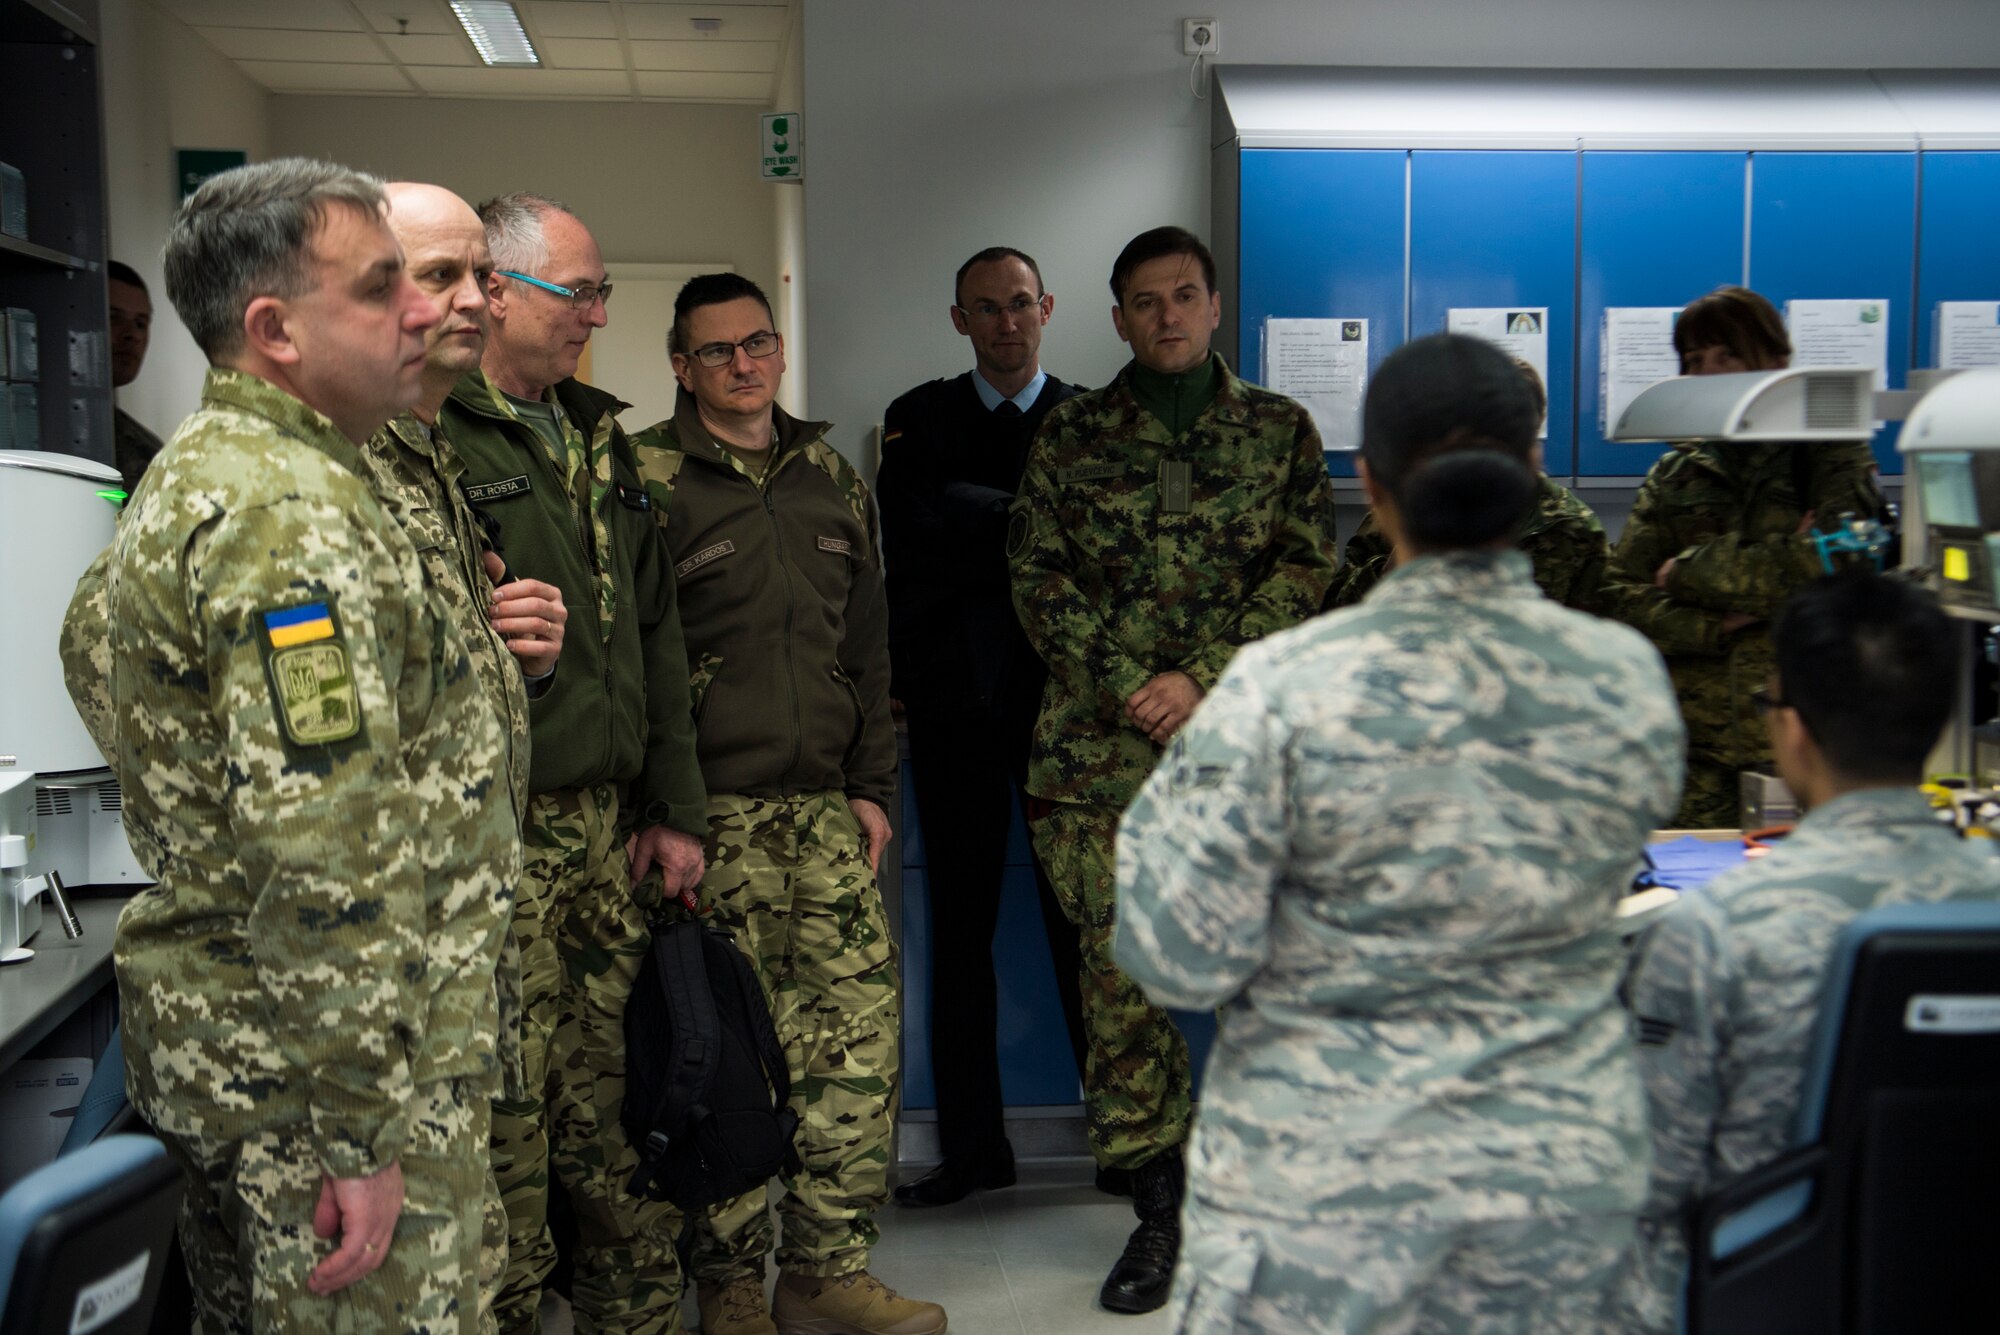 Military dental officers from NATO partners, allies, and partners for peace nations, attended a dental readiness workshop hosted by the USAFE-AFAFRICA Surgeon General March 25-29, 2019 at Ramstein Air Base, Germany.